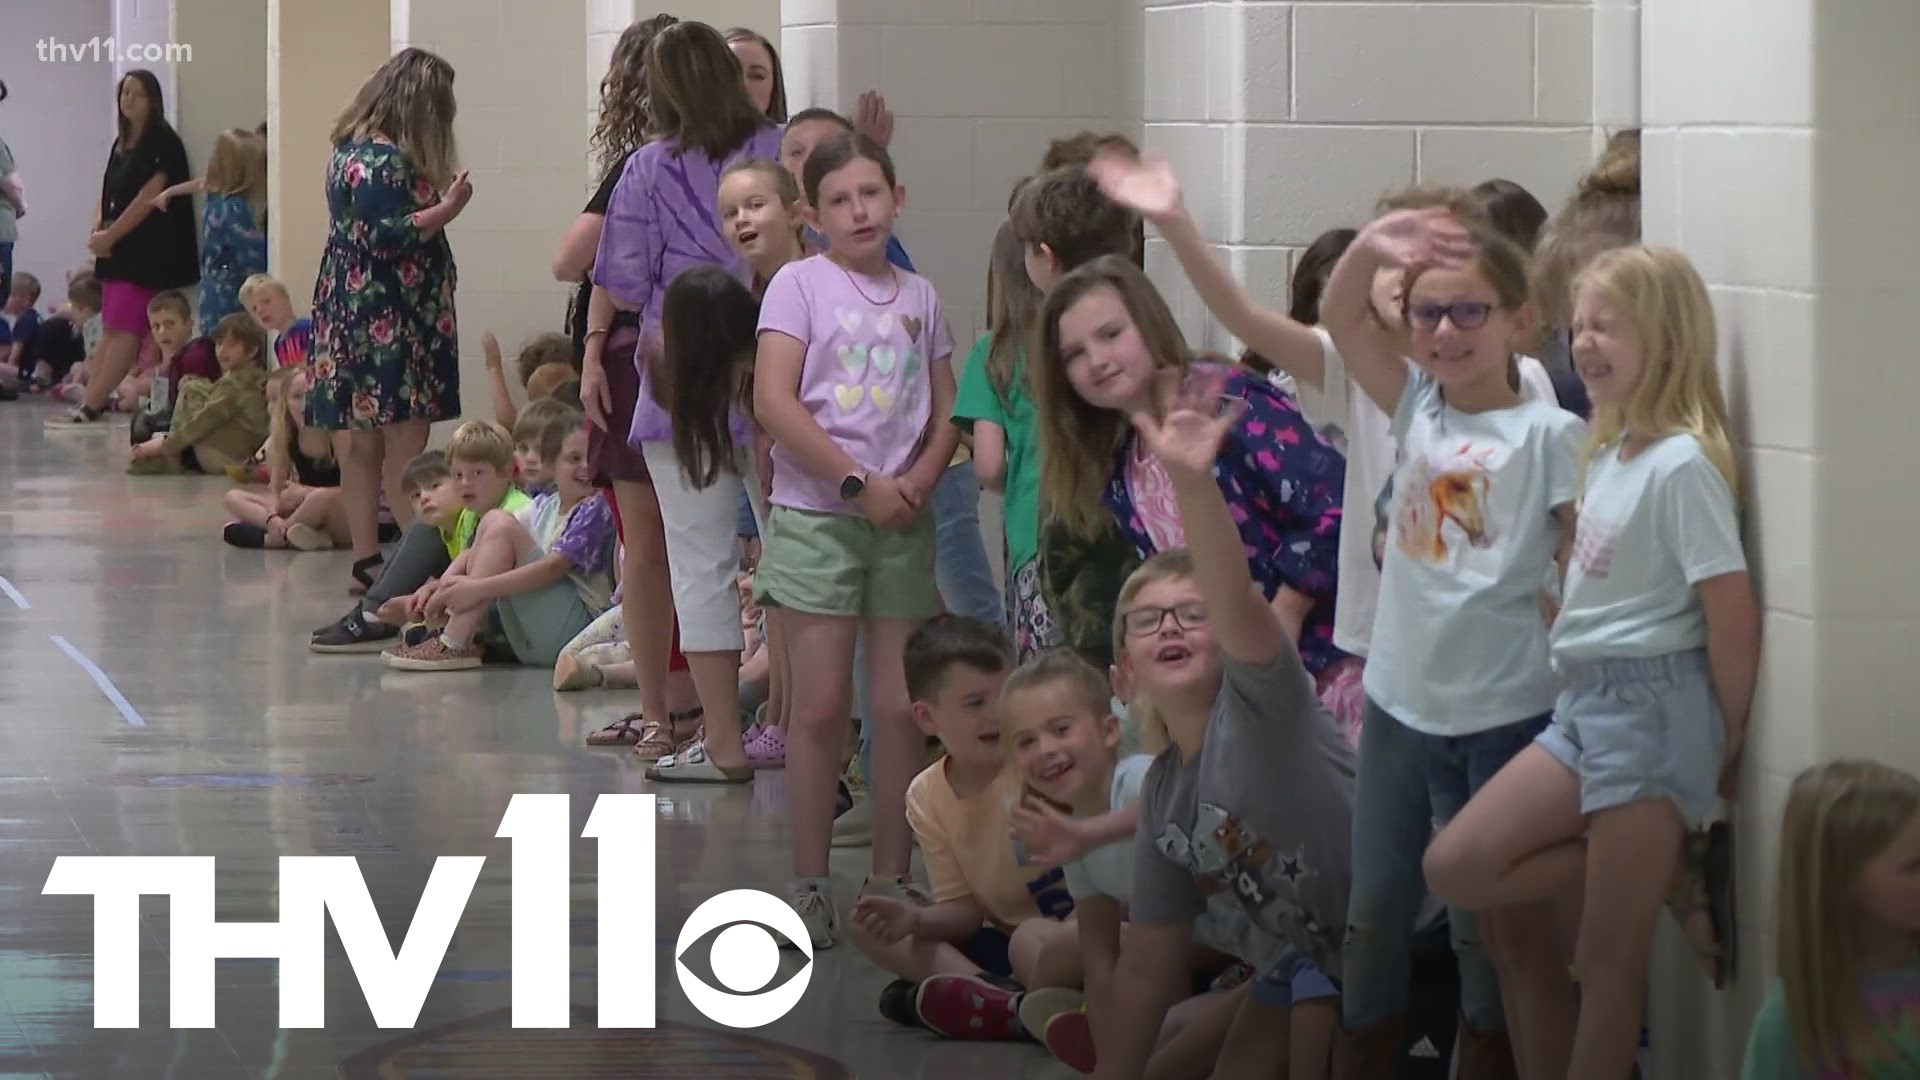 Students at Stagecoach Elementary in Cabot participated in the THV11 Summer Cereal Drive by collecting 1,000 cereal boxes and toppling them over like dominoes.